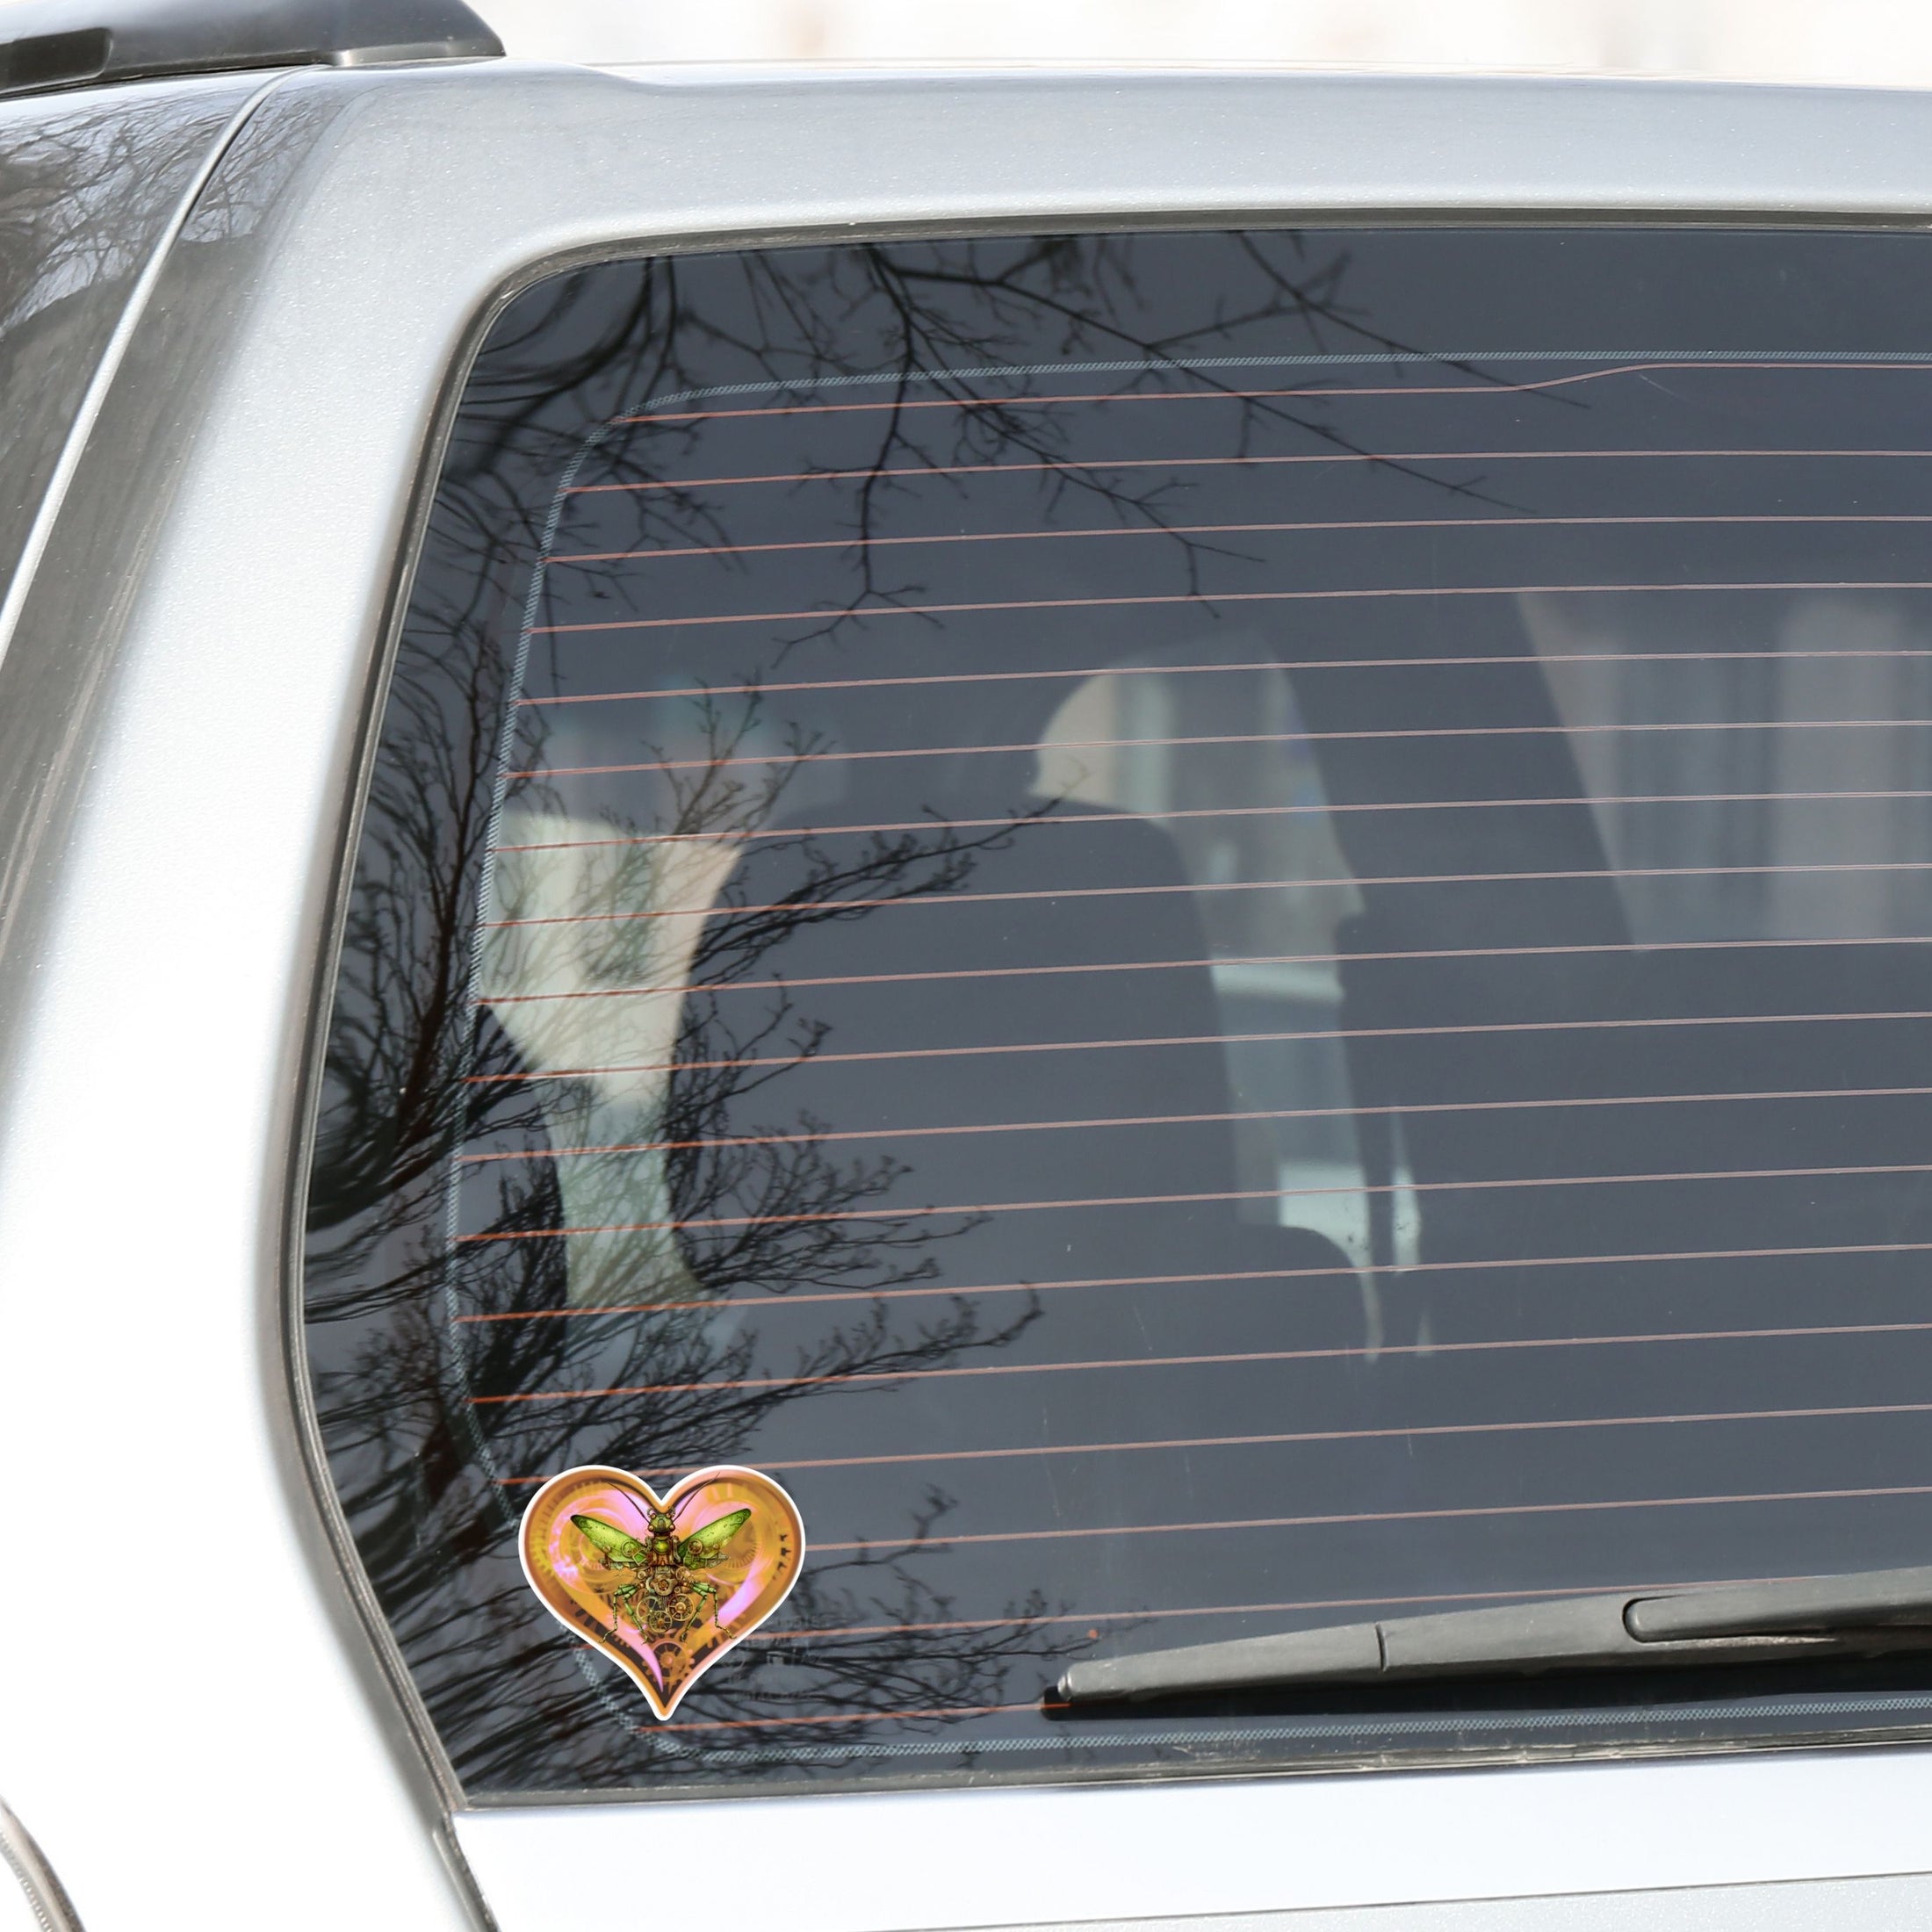 This image shows the steampunk love bug sticker on the back window of a car.